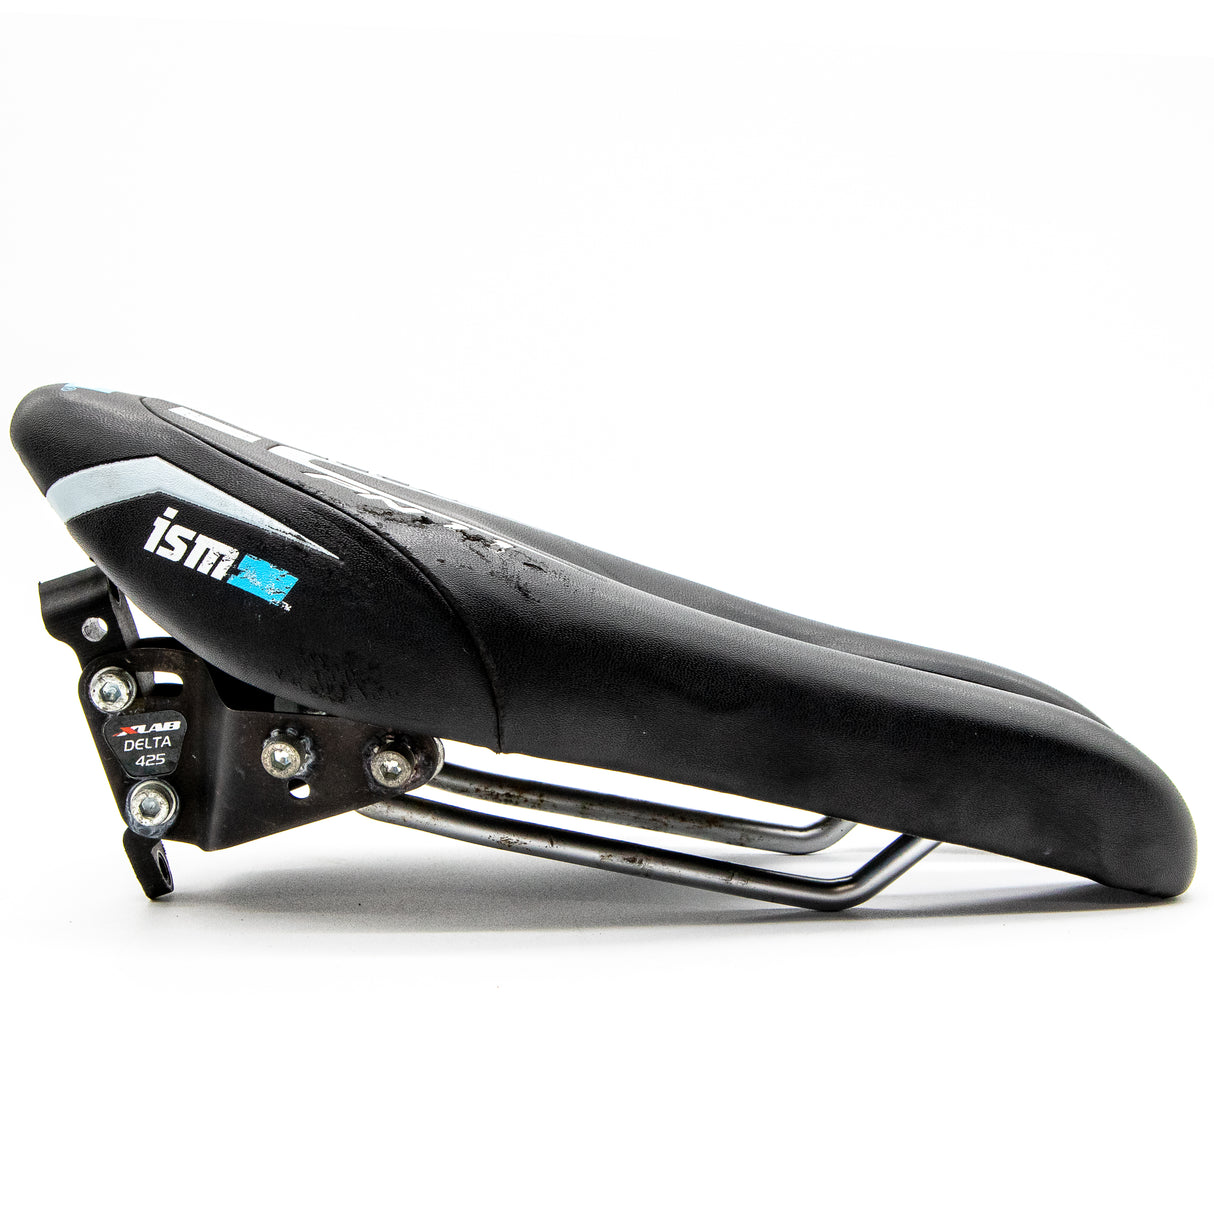 ISM PN 1.1 Black with XLAB Delta 425 Rear Carrier 501g